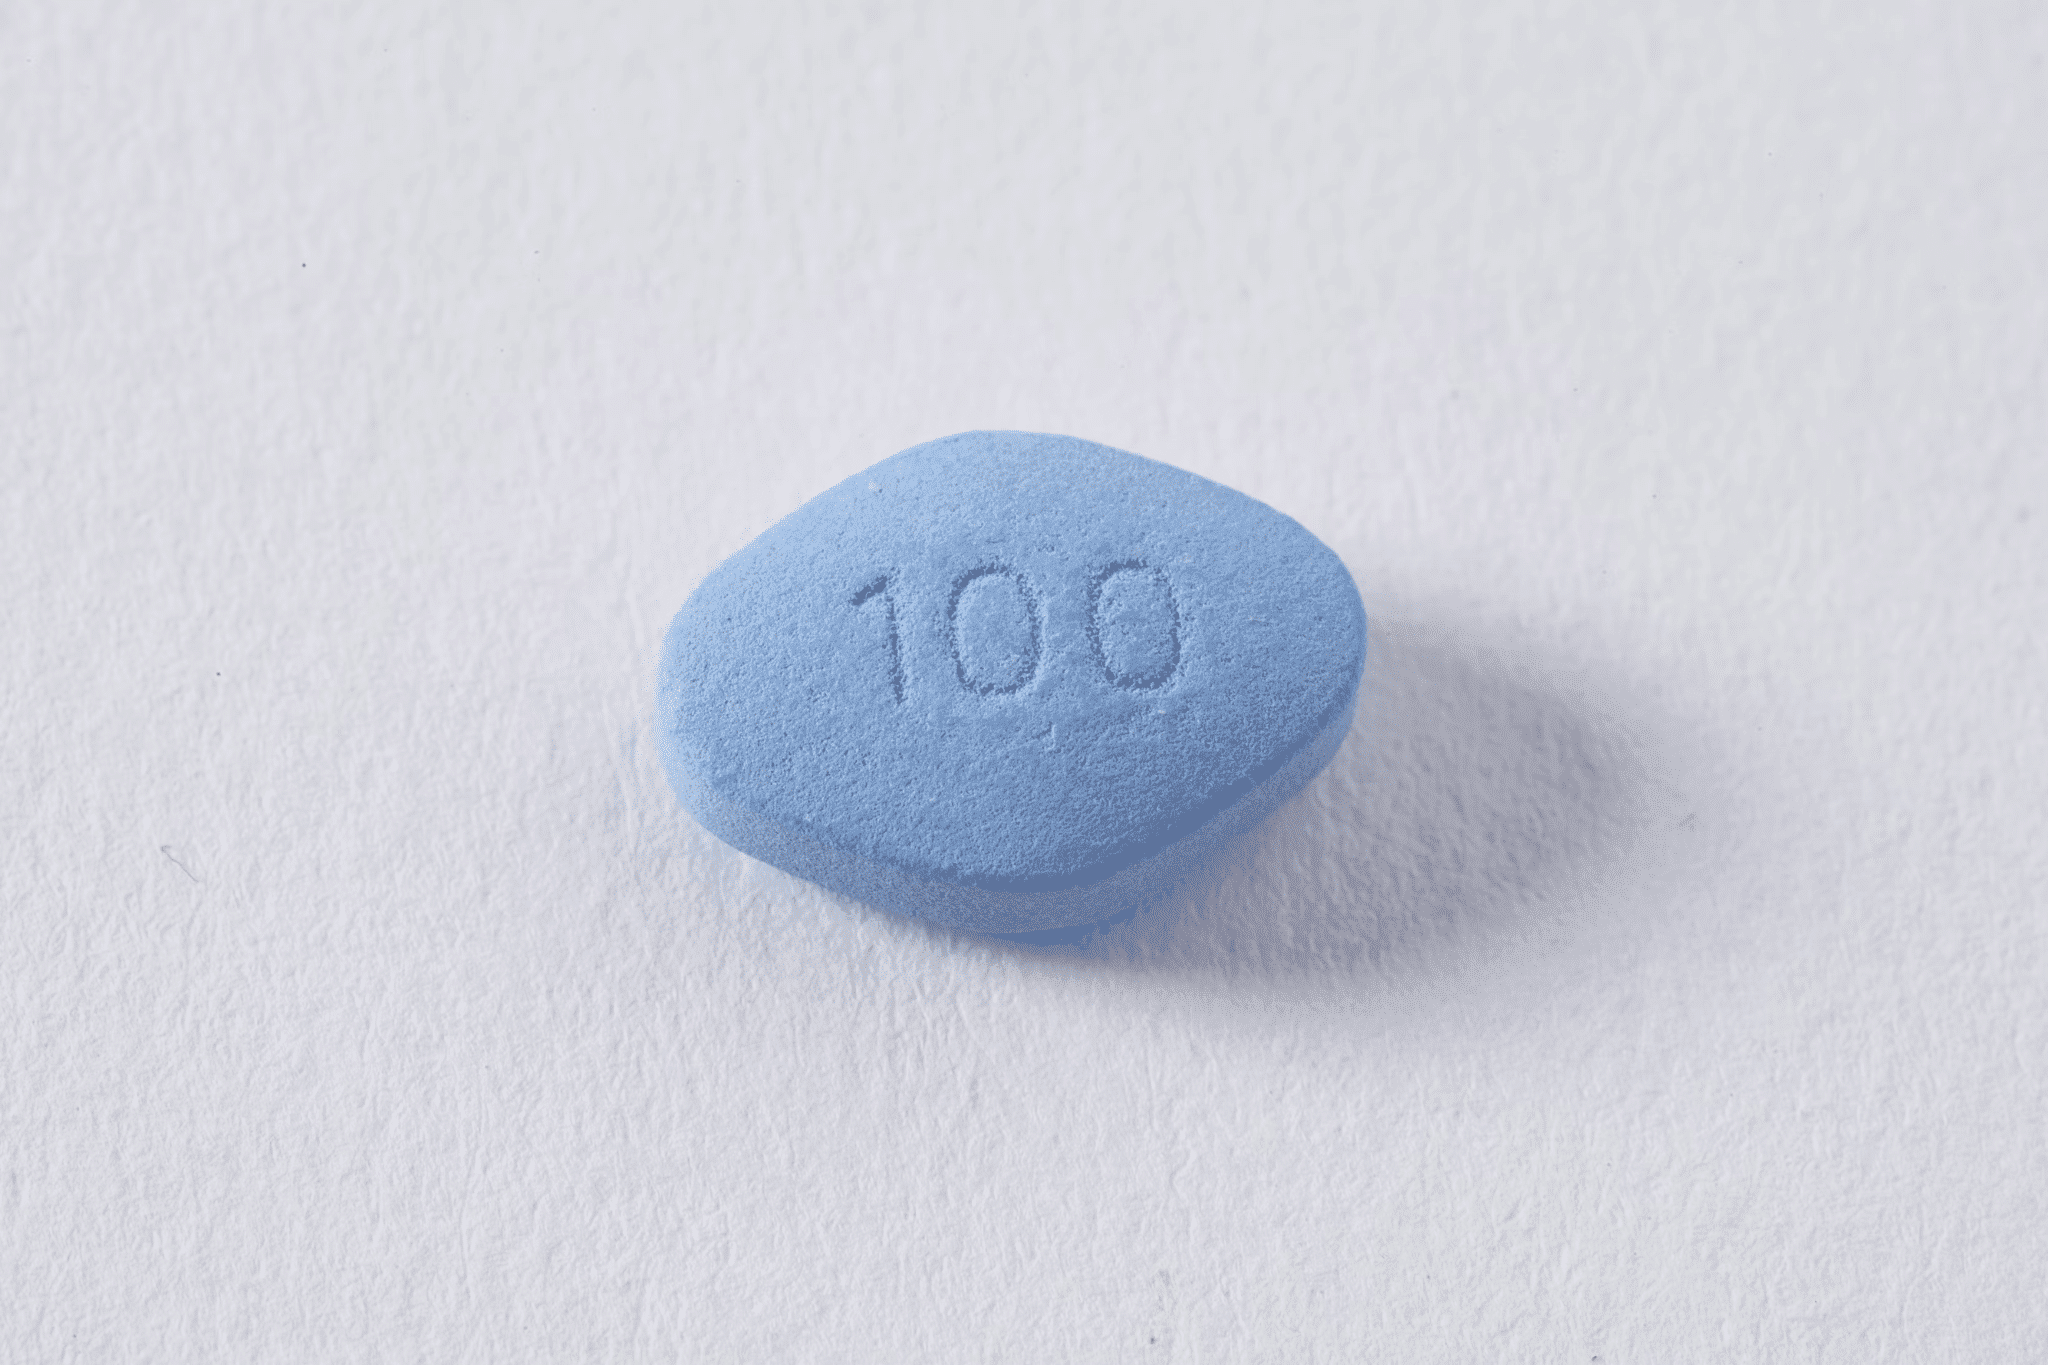 Zolpidem or Ambien